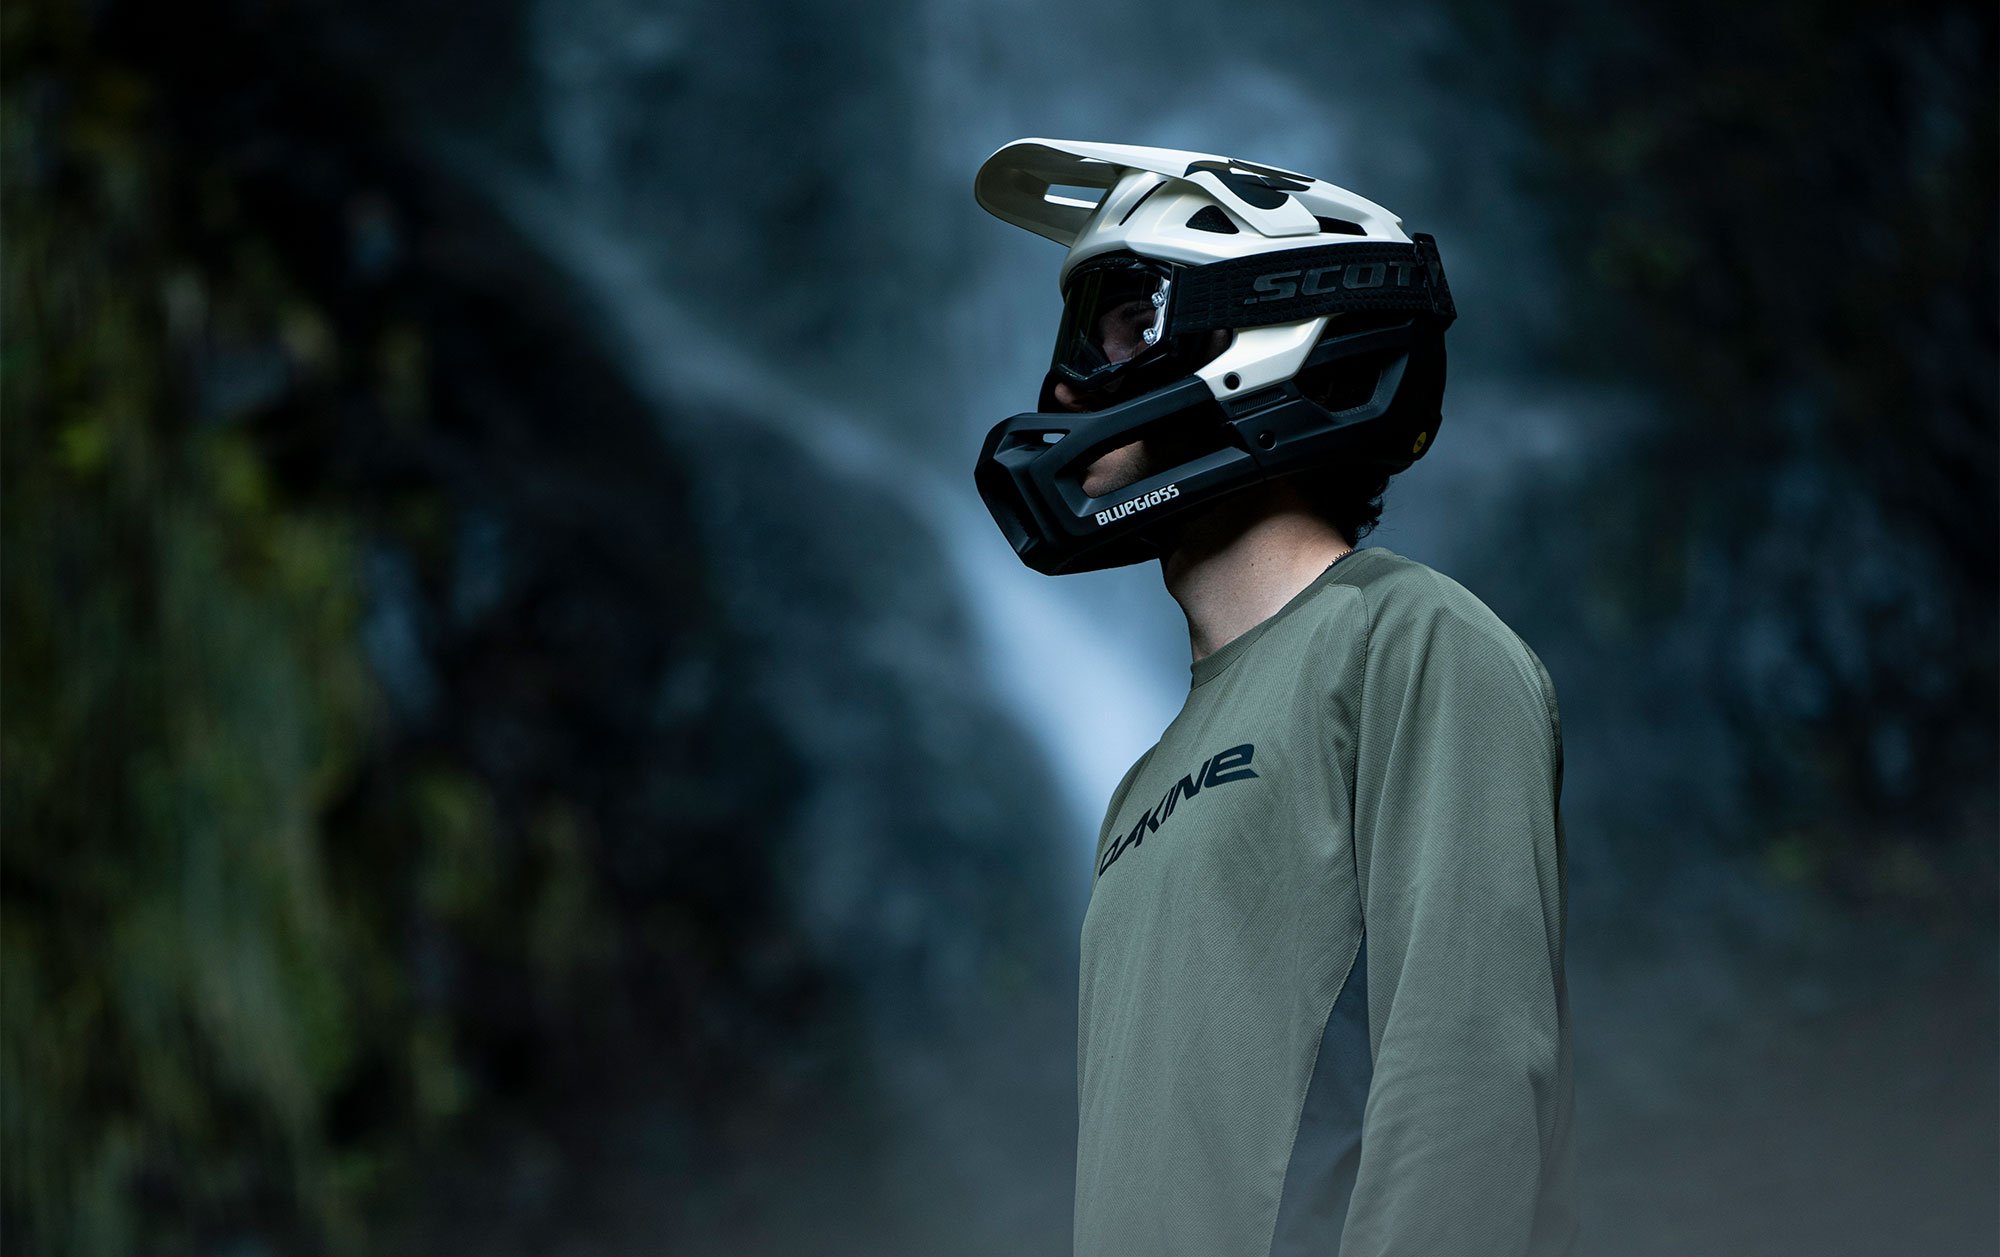 Bluegrass Vanguard Core Mips is a Lightweight Full-Face MTB Helmet designed for Enduro, Trail and E-MTB